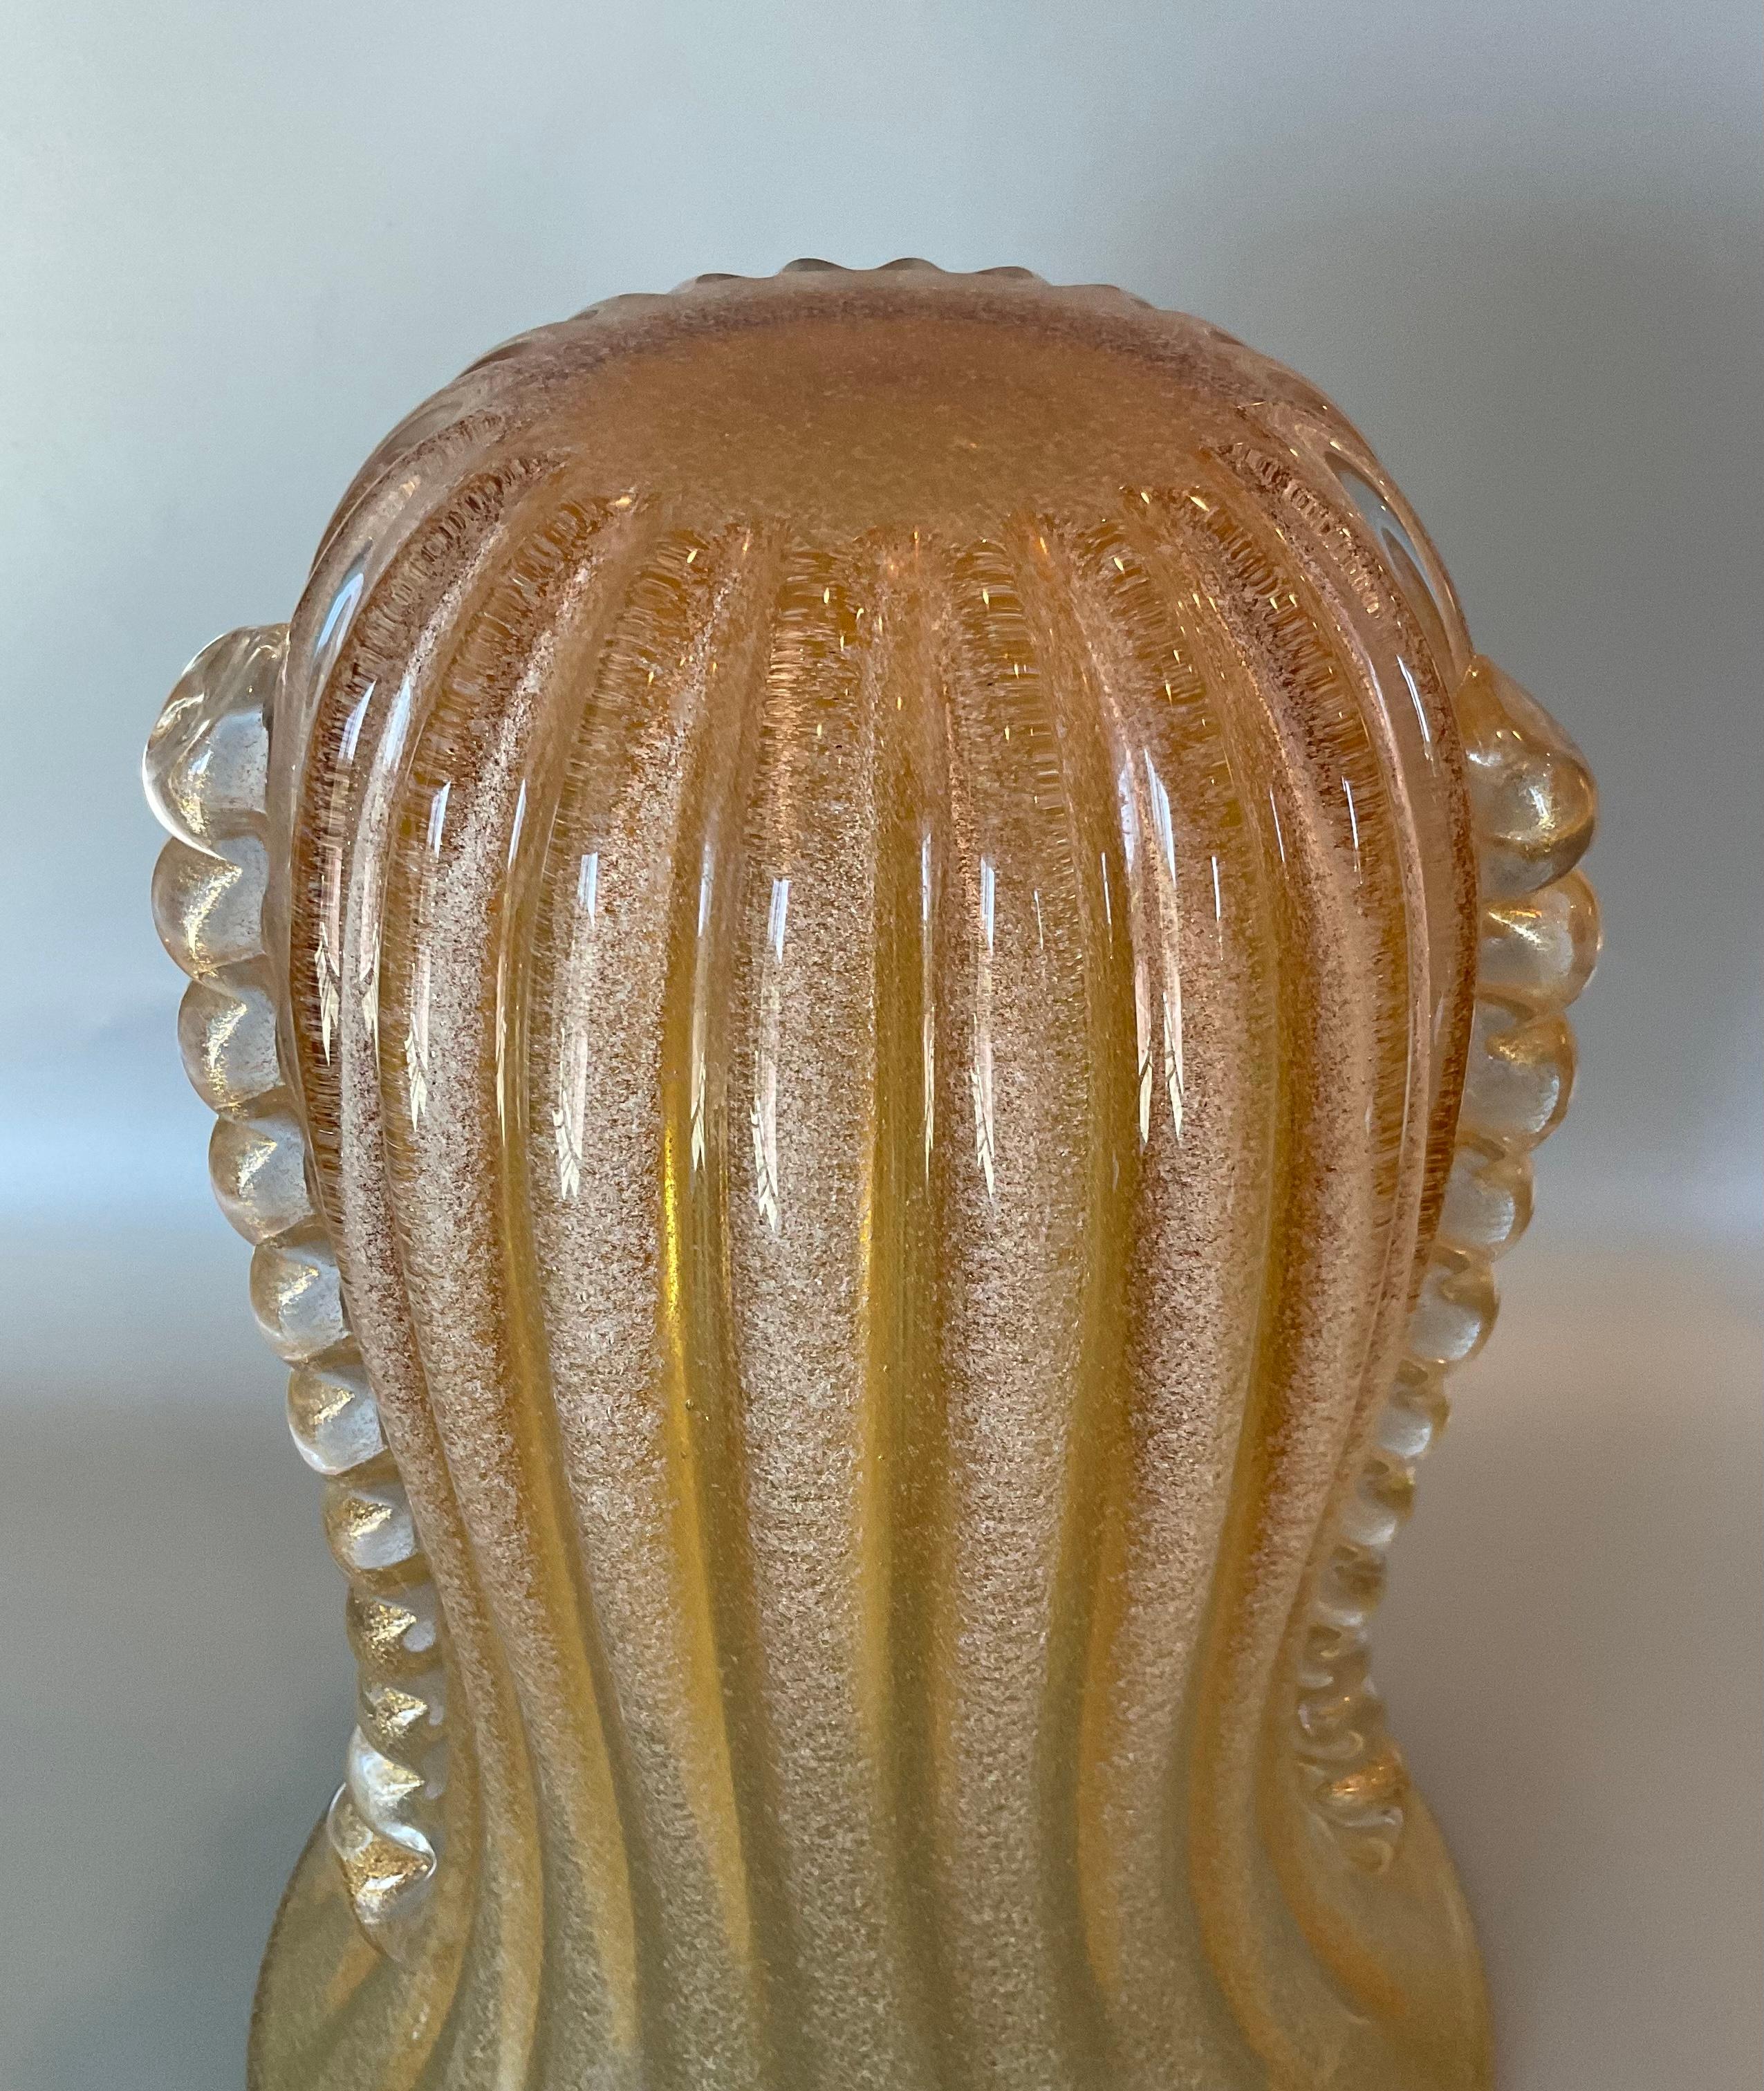 Large Murano Art Glass Vase in Gold Pulegoso glass with Gold Applied Handles. The vase has a ribbed design. Sophisticated style and execution.